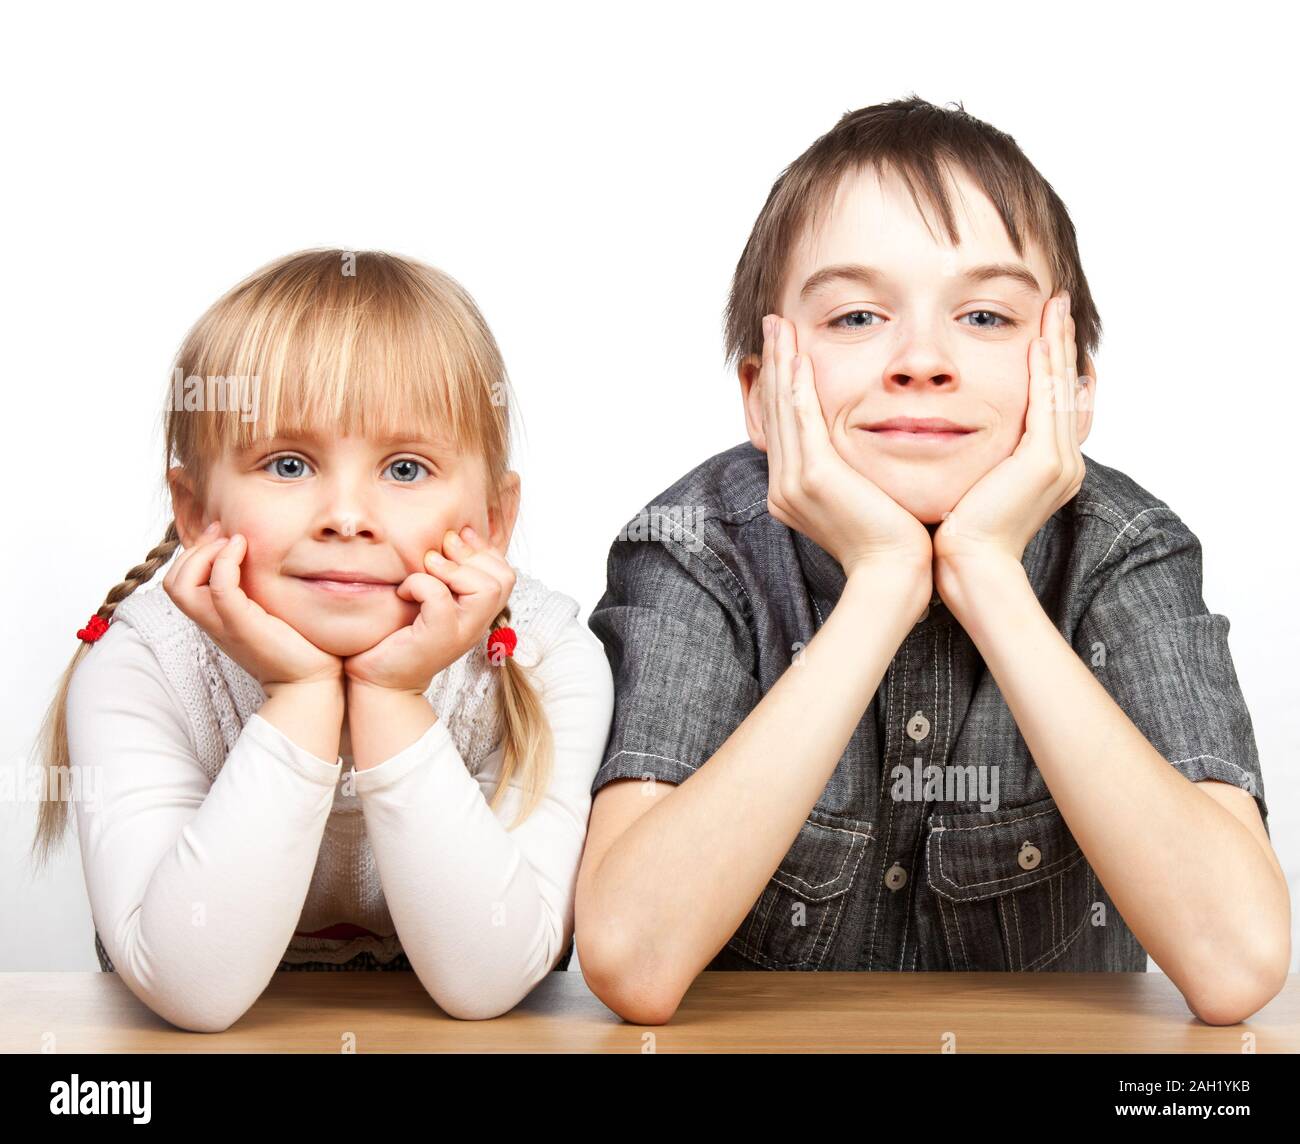 Portrait of cute girl and boy sitting at desk with hands on chin Banque D'Images